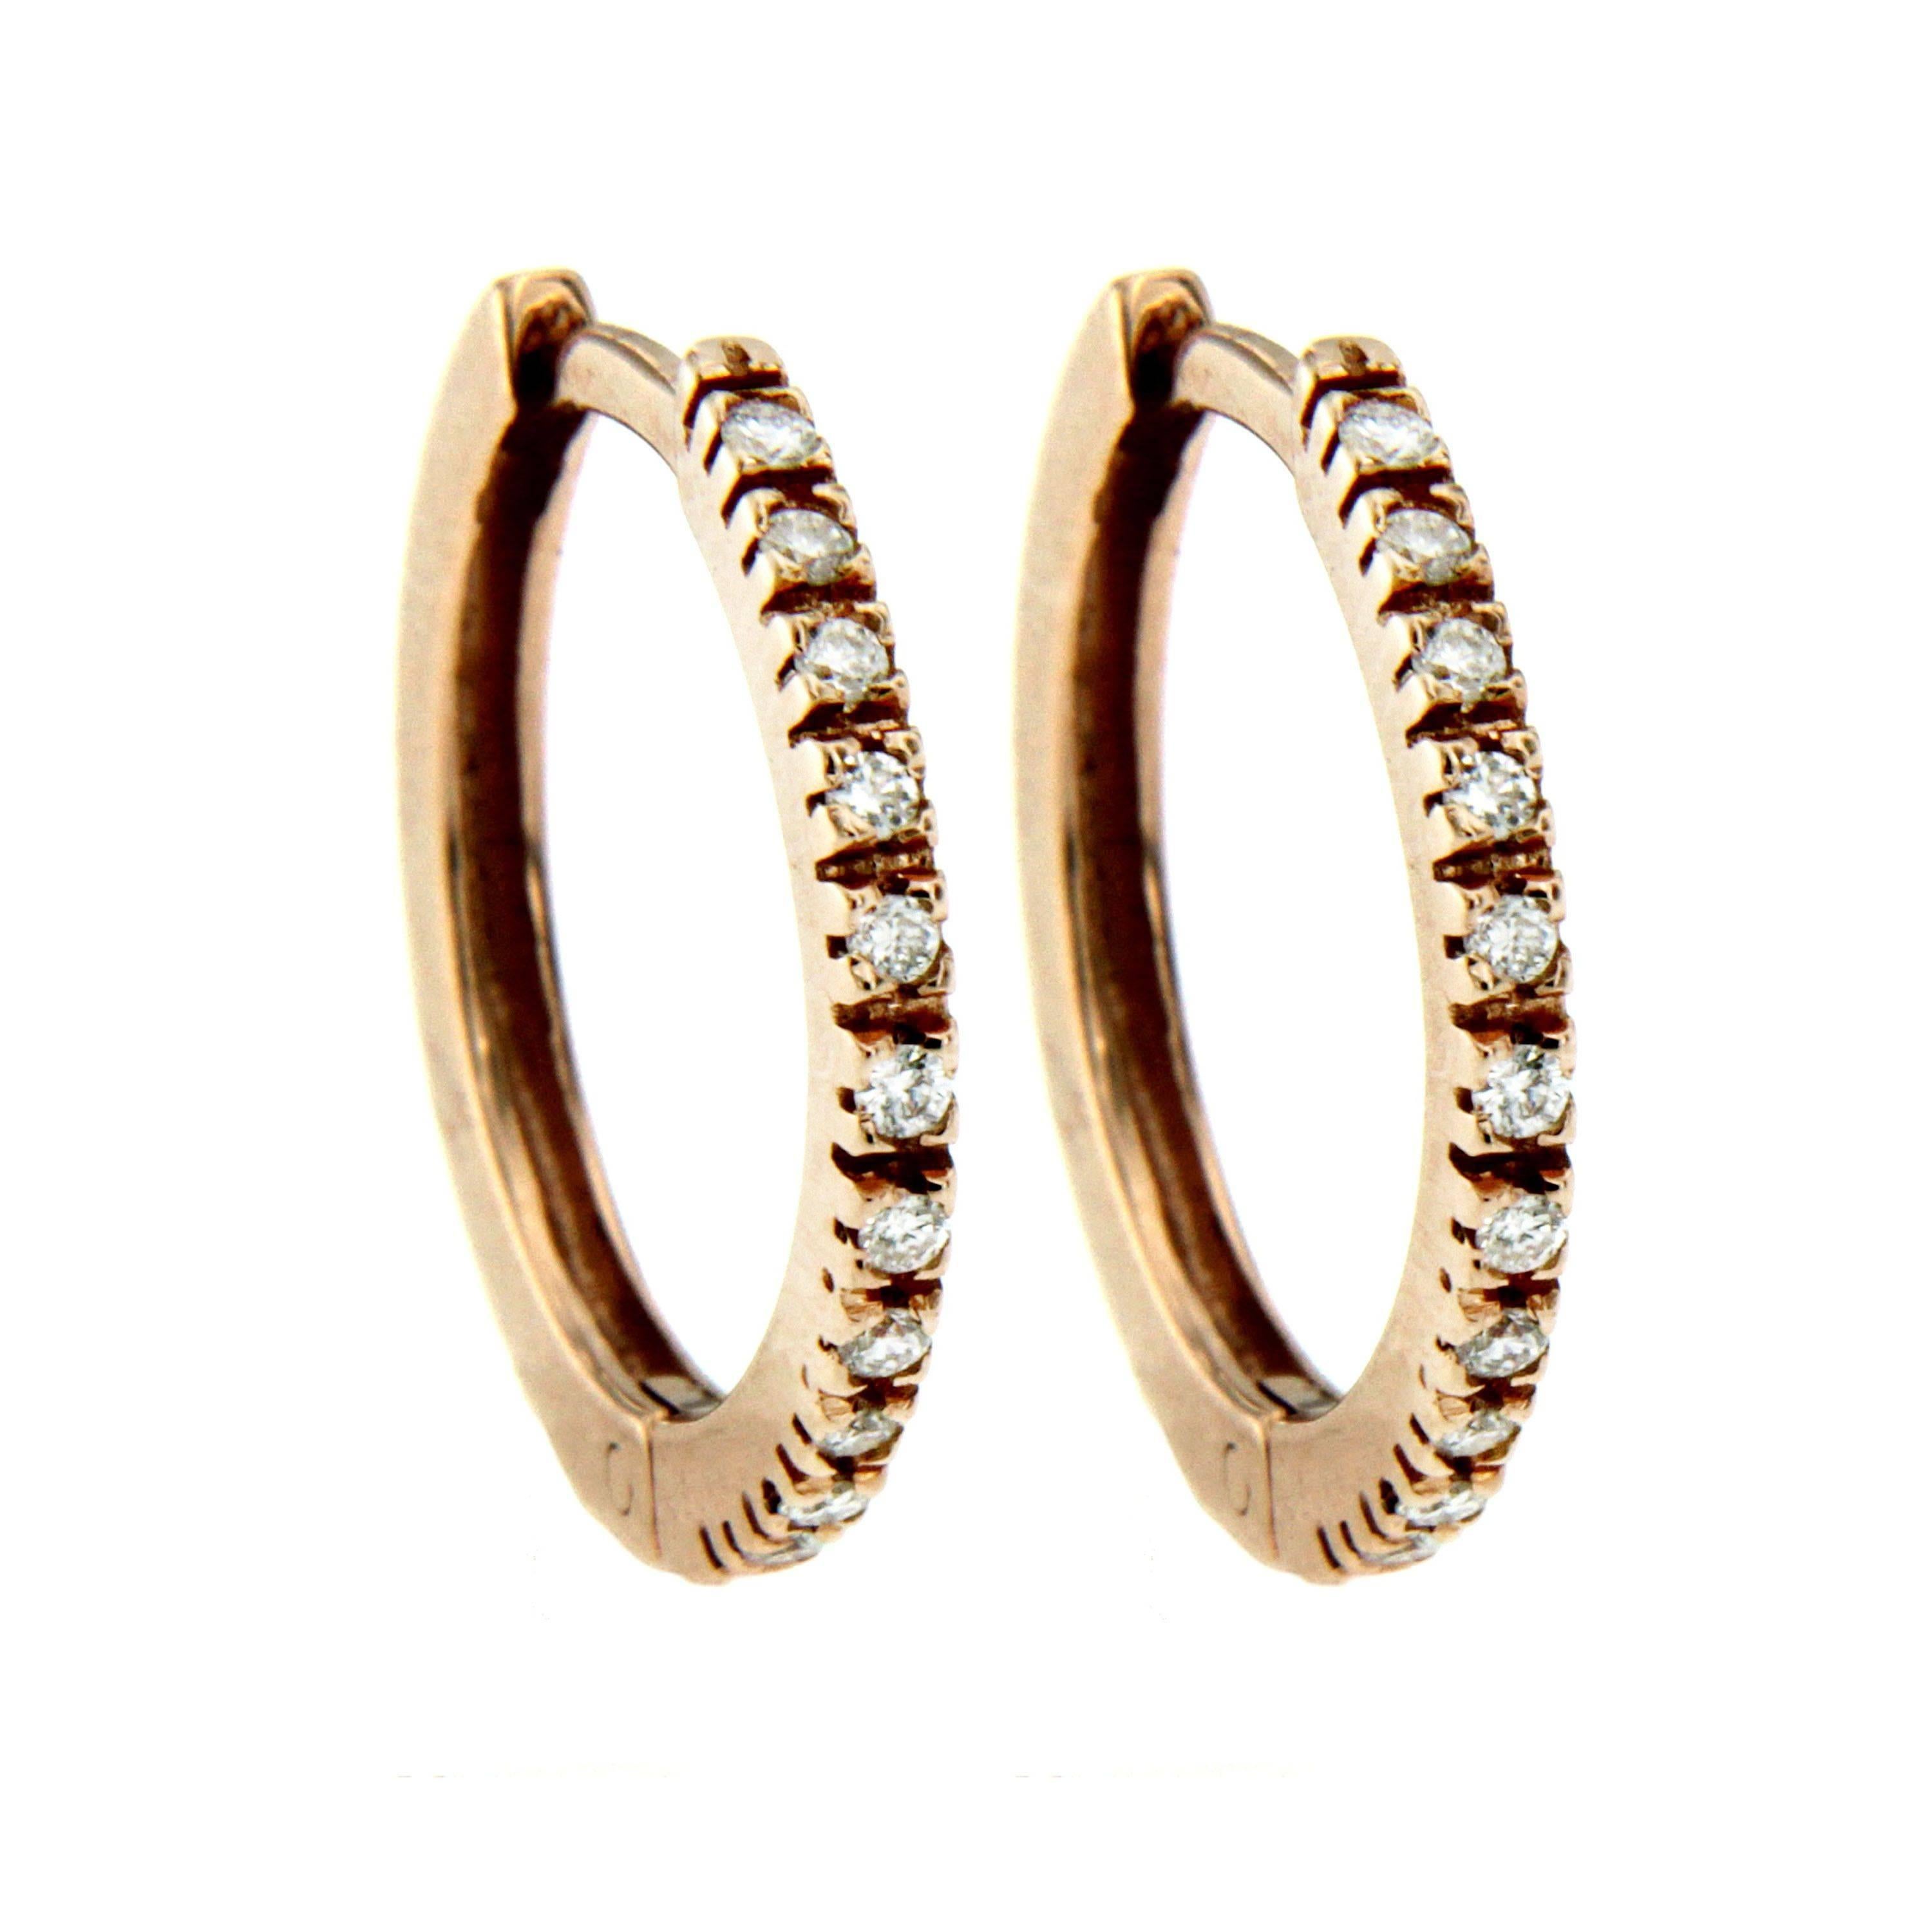 These hoop earrings are crafted in Italy from 18k rose gold and embellished with 0.15-carats of sparkling Round brilliant cut Diamonds, graded G color Vvs clarity. The delicate size makes them perfect for every day.

These earrings are from our own